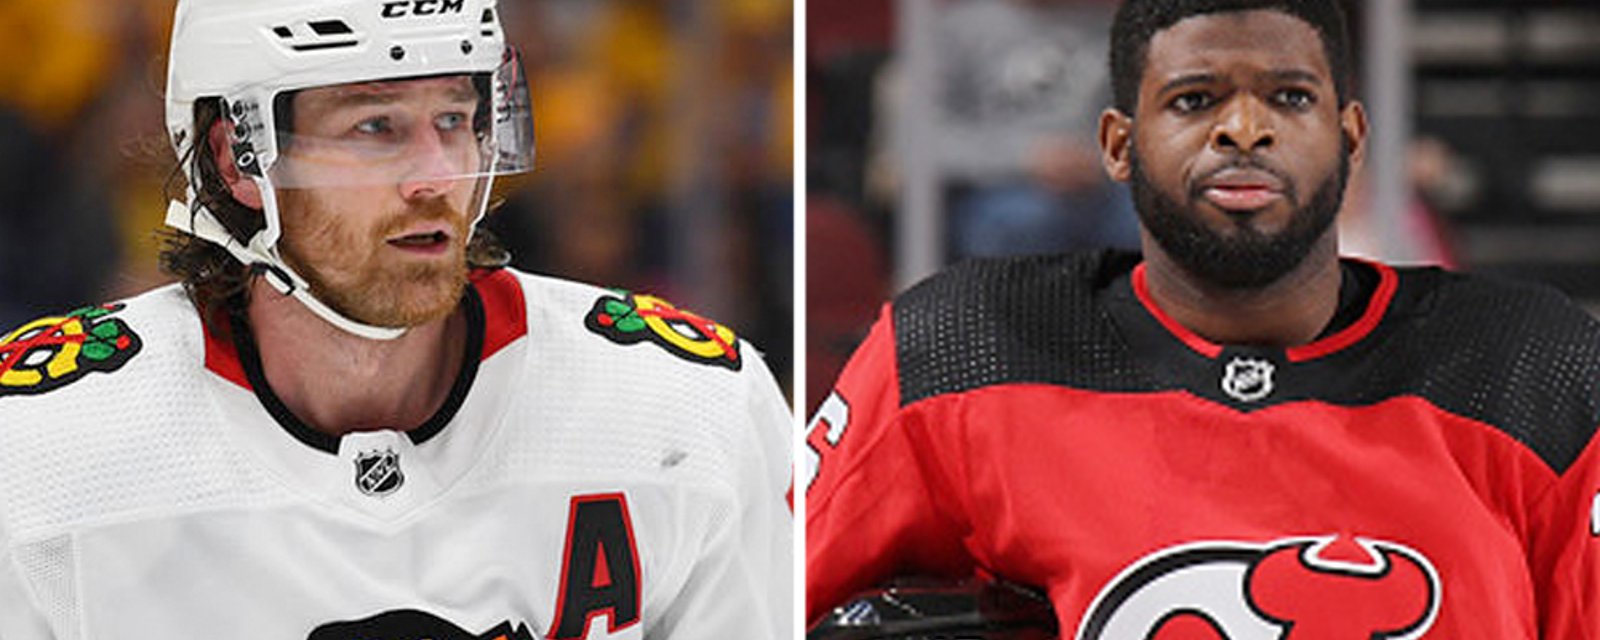 Duncan Keith’s advice to P.K. Subban: “It’s all about the team.”